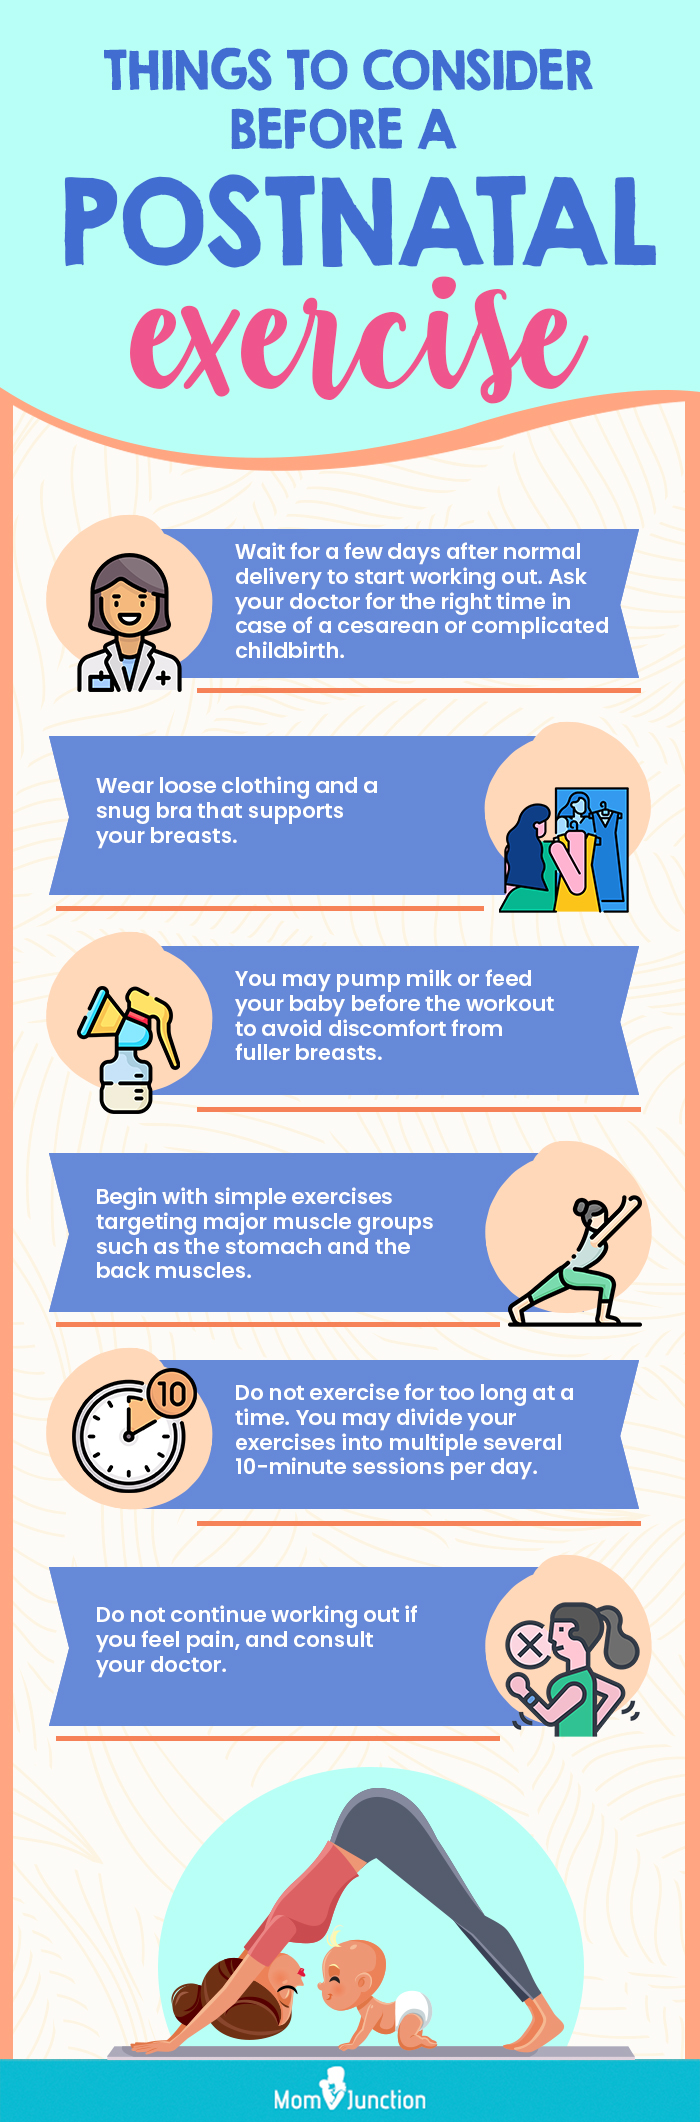 3 Best Postpartum Exercises That You Must Do